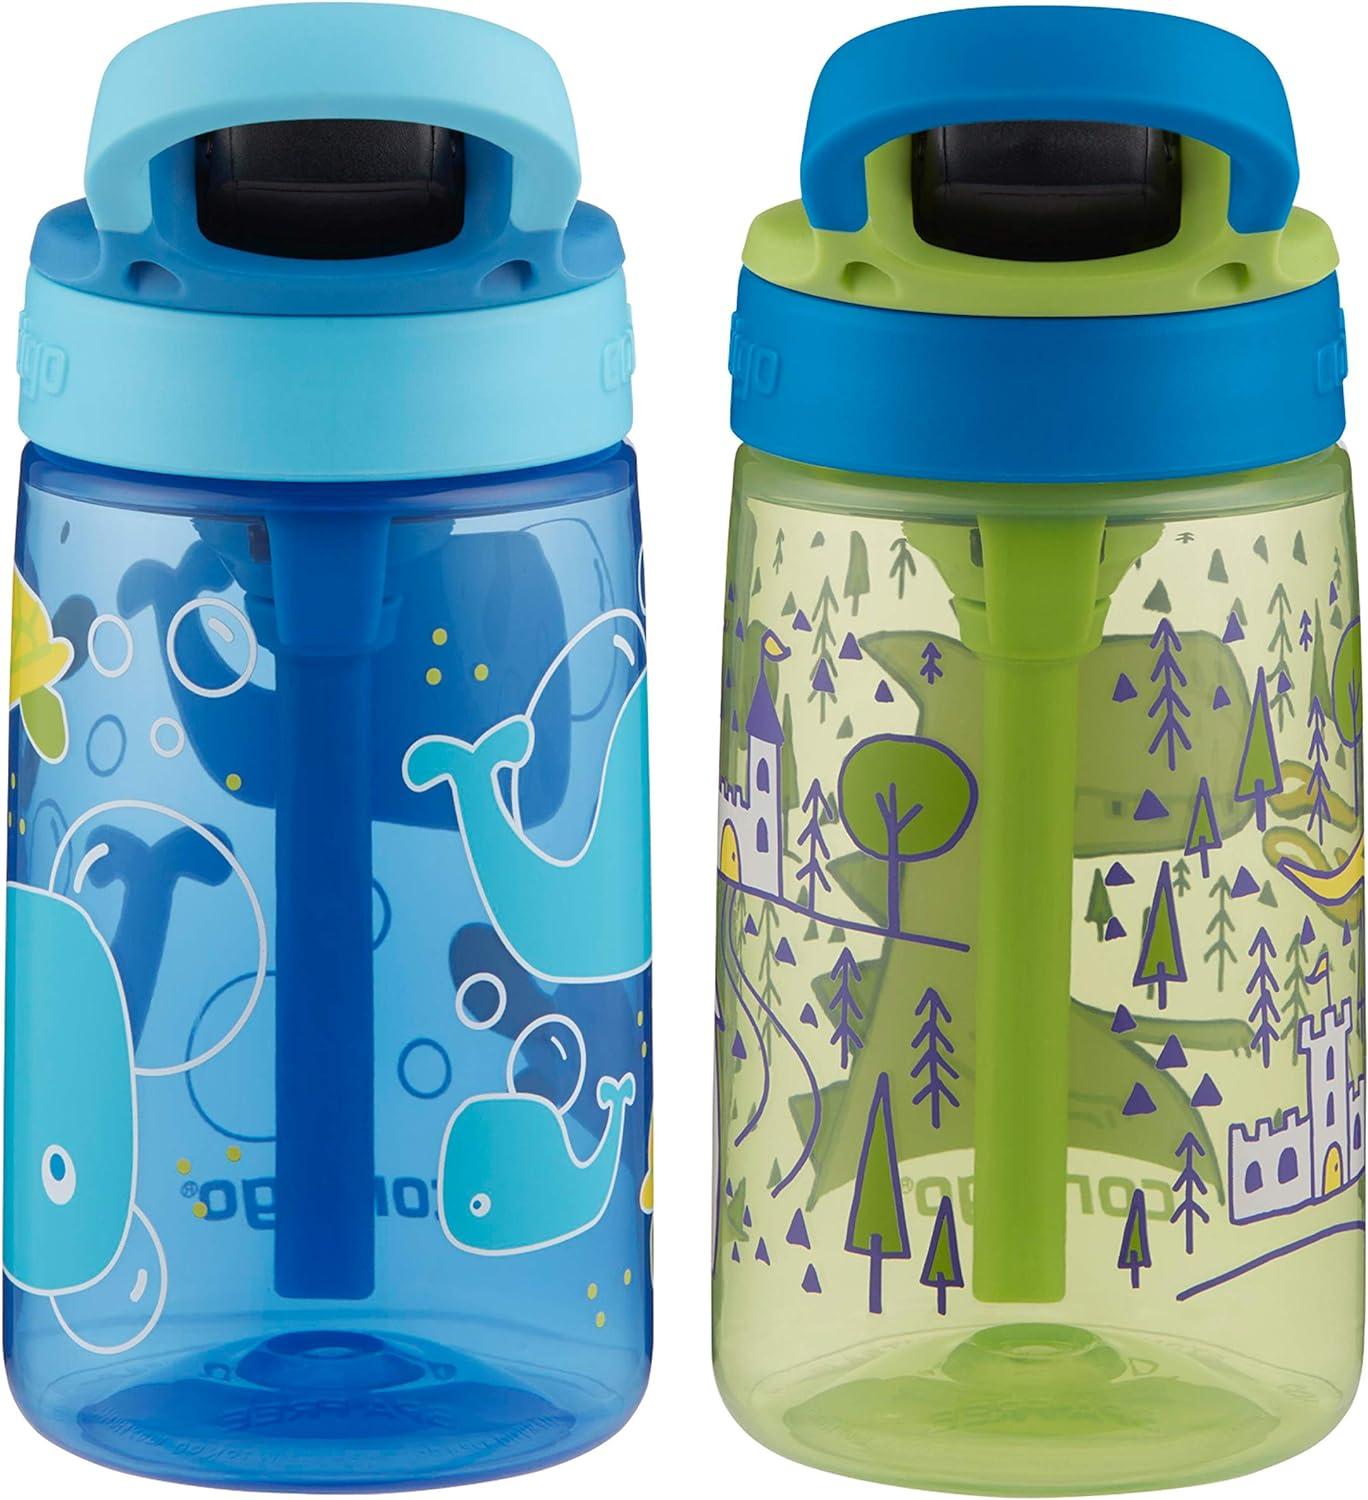 Contigo Aubrey Kids Cleanable Water Bottle with Silicone Straw and  Spill-Proof Lid, Dishwasher Safe, 14oz 2-Pack, Blueberry & Cosmos